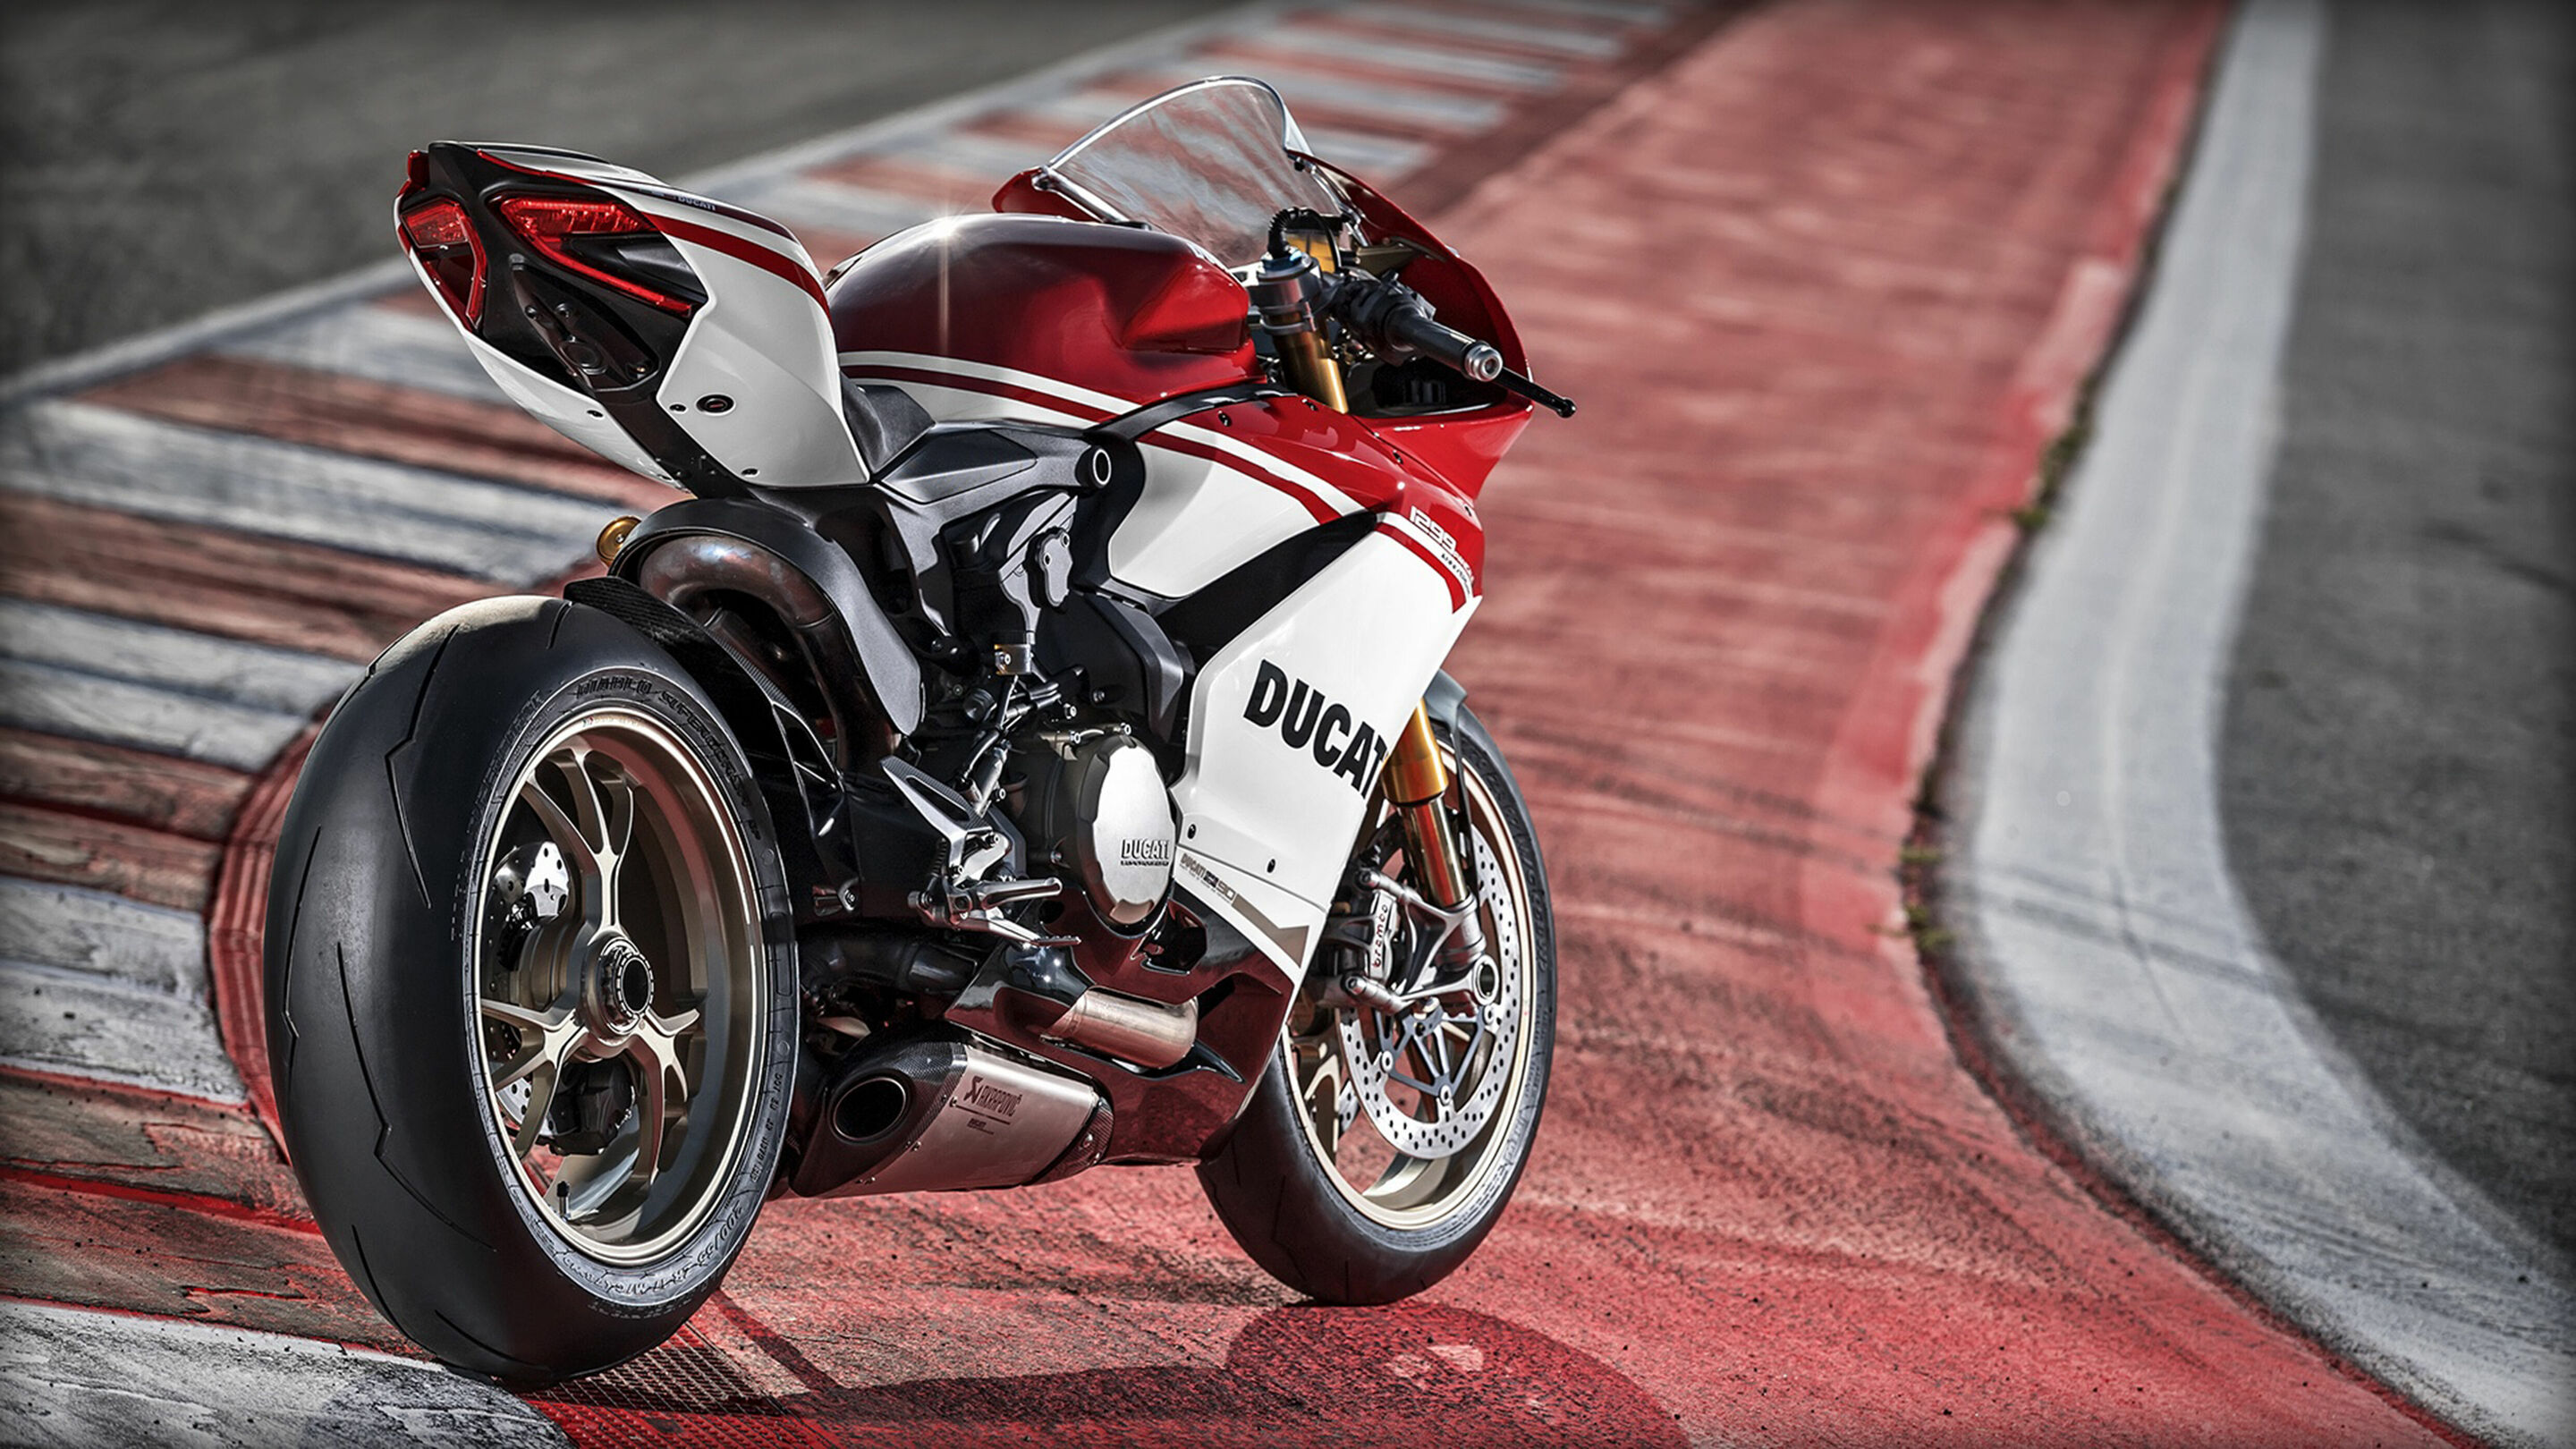 Ducati's passion on show at Audi museum mobile